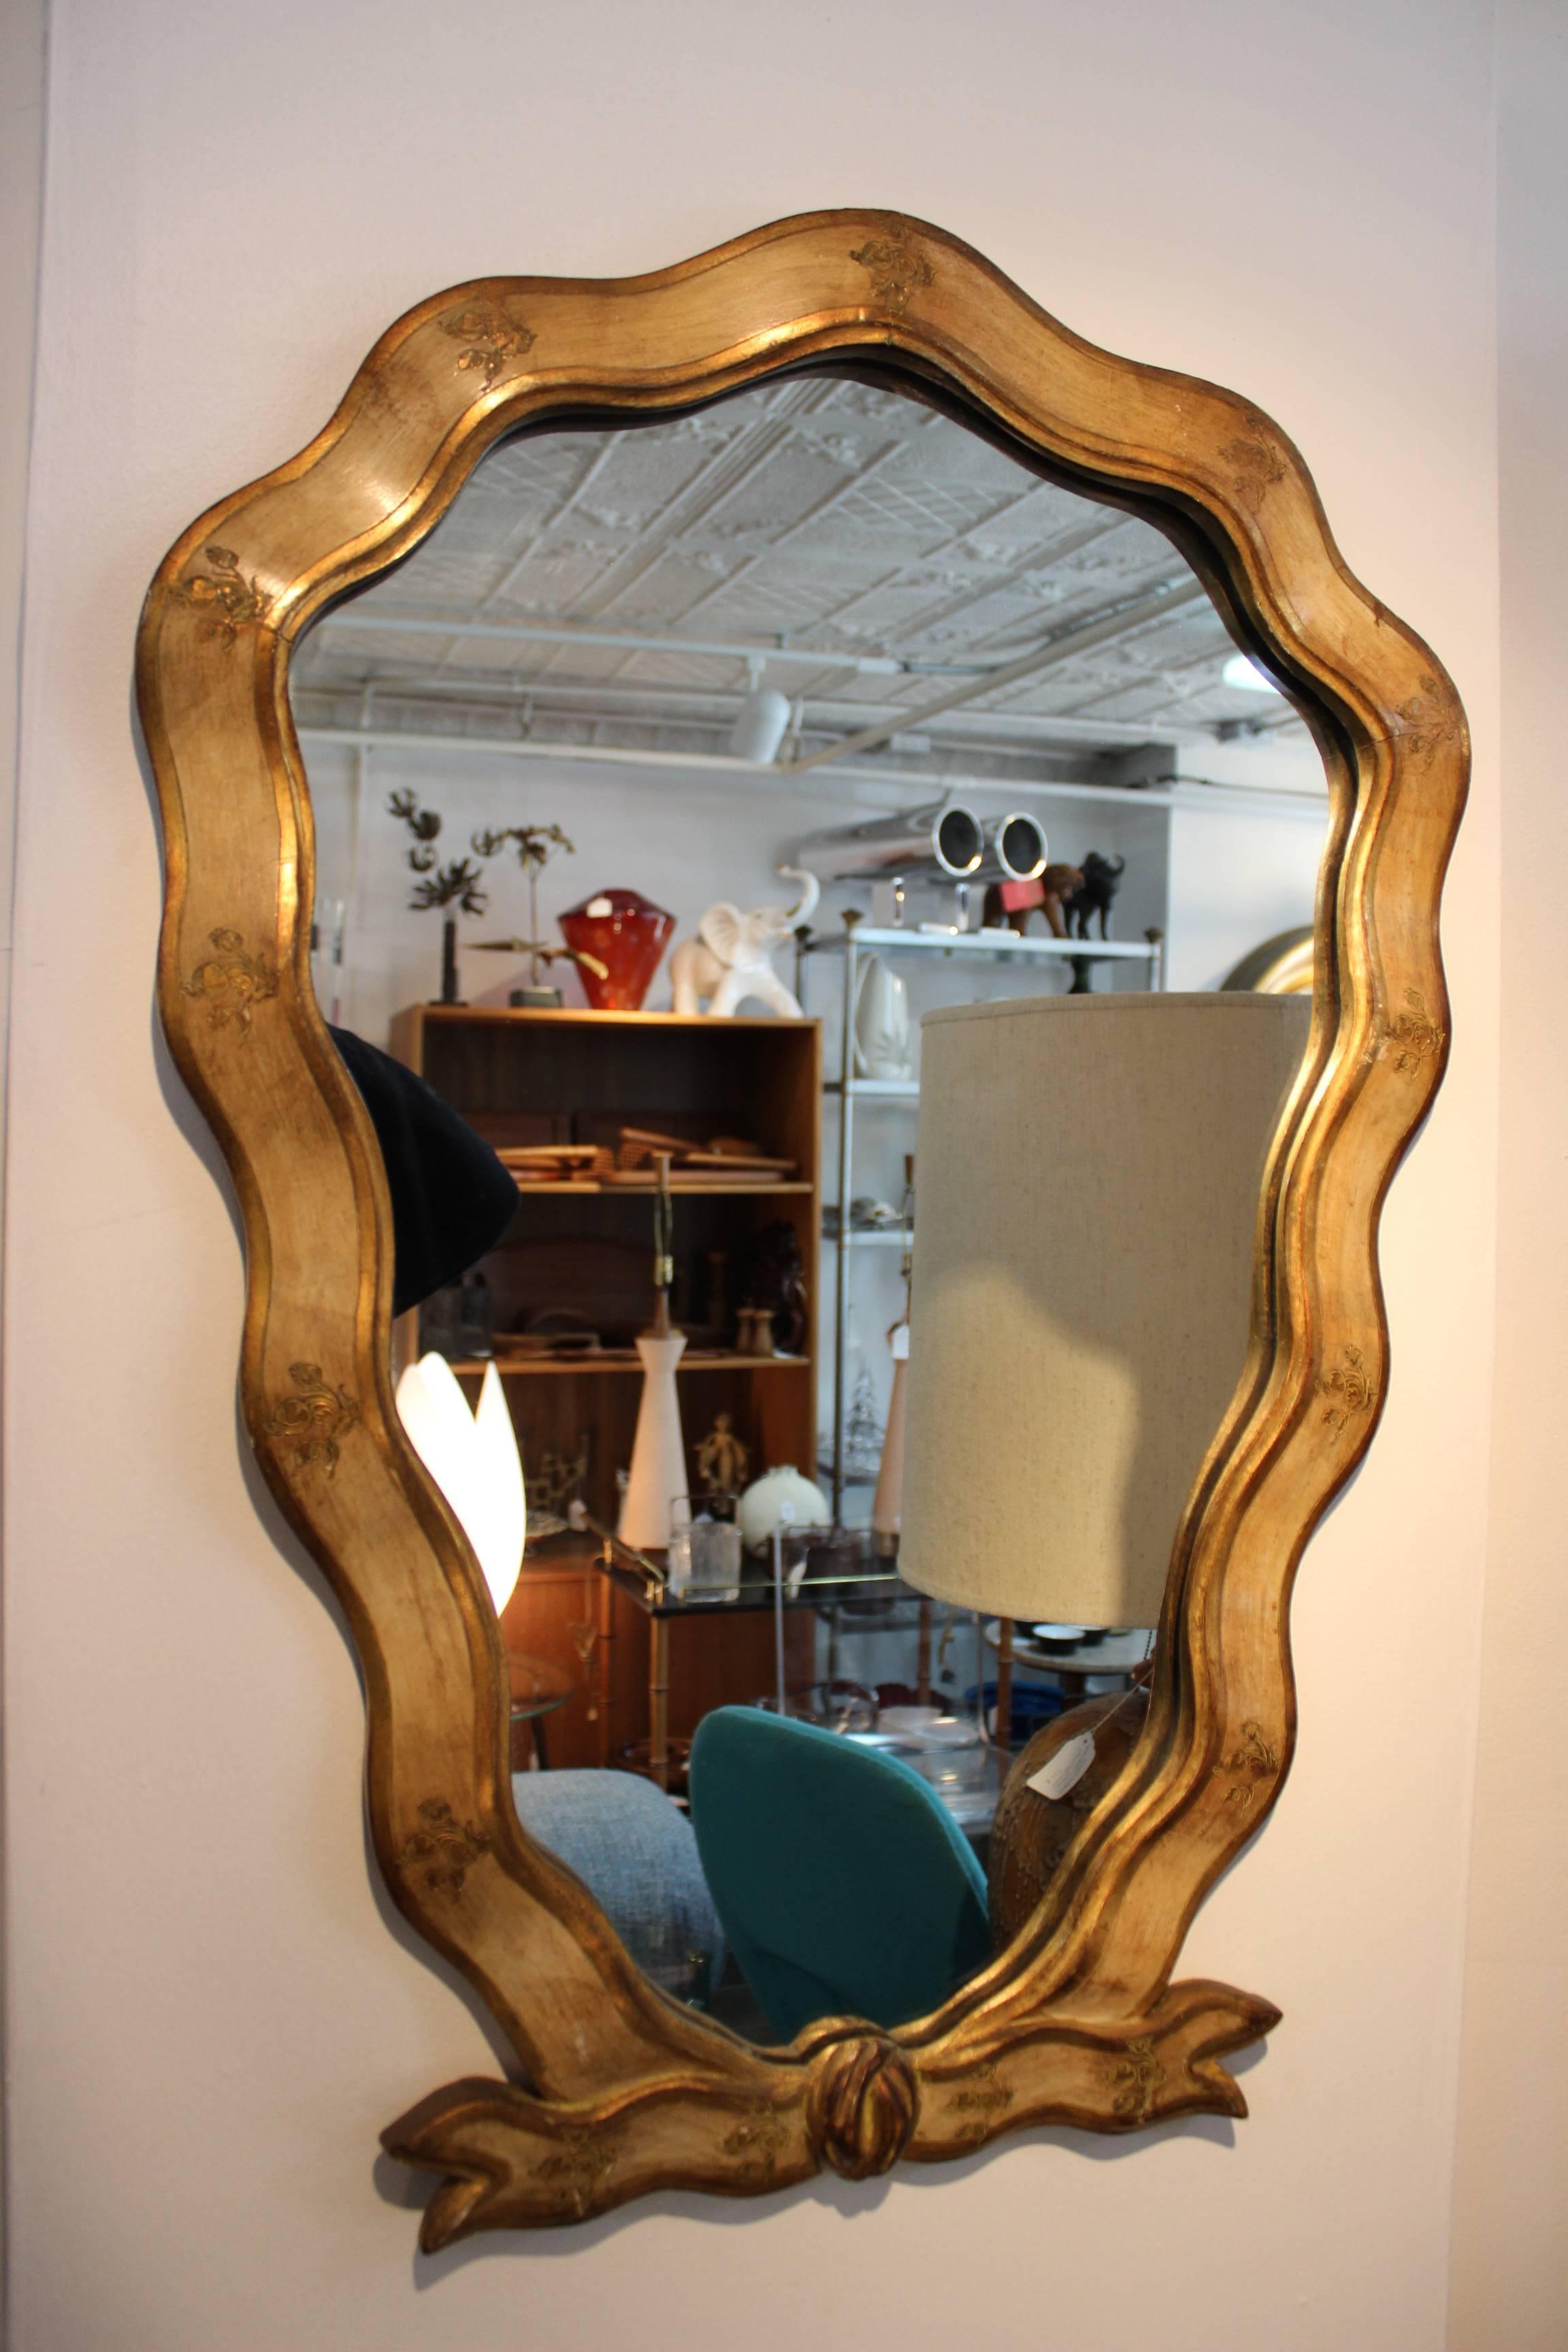 1940s wood frame Italian mirror with matching console.

Console measurements:
height 25''.
depth 12''.
width 23.5.